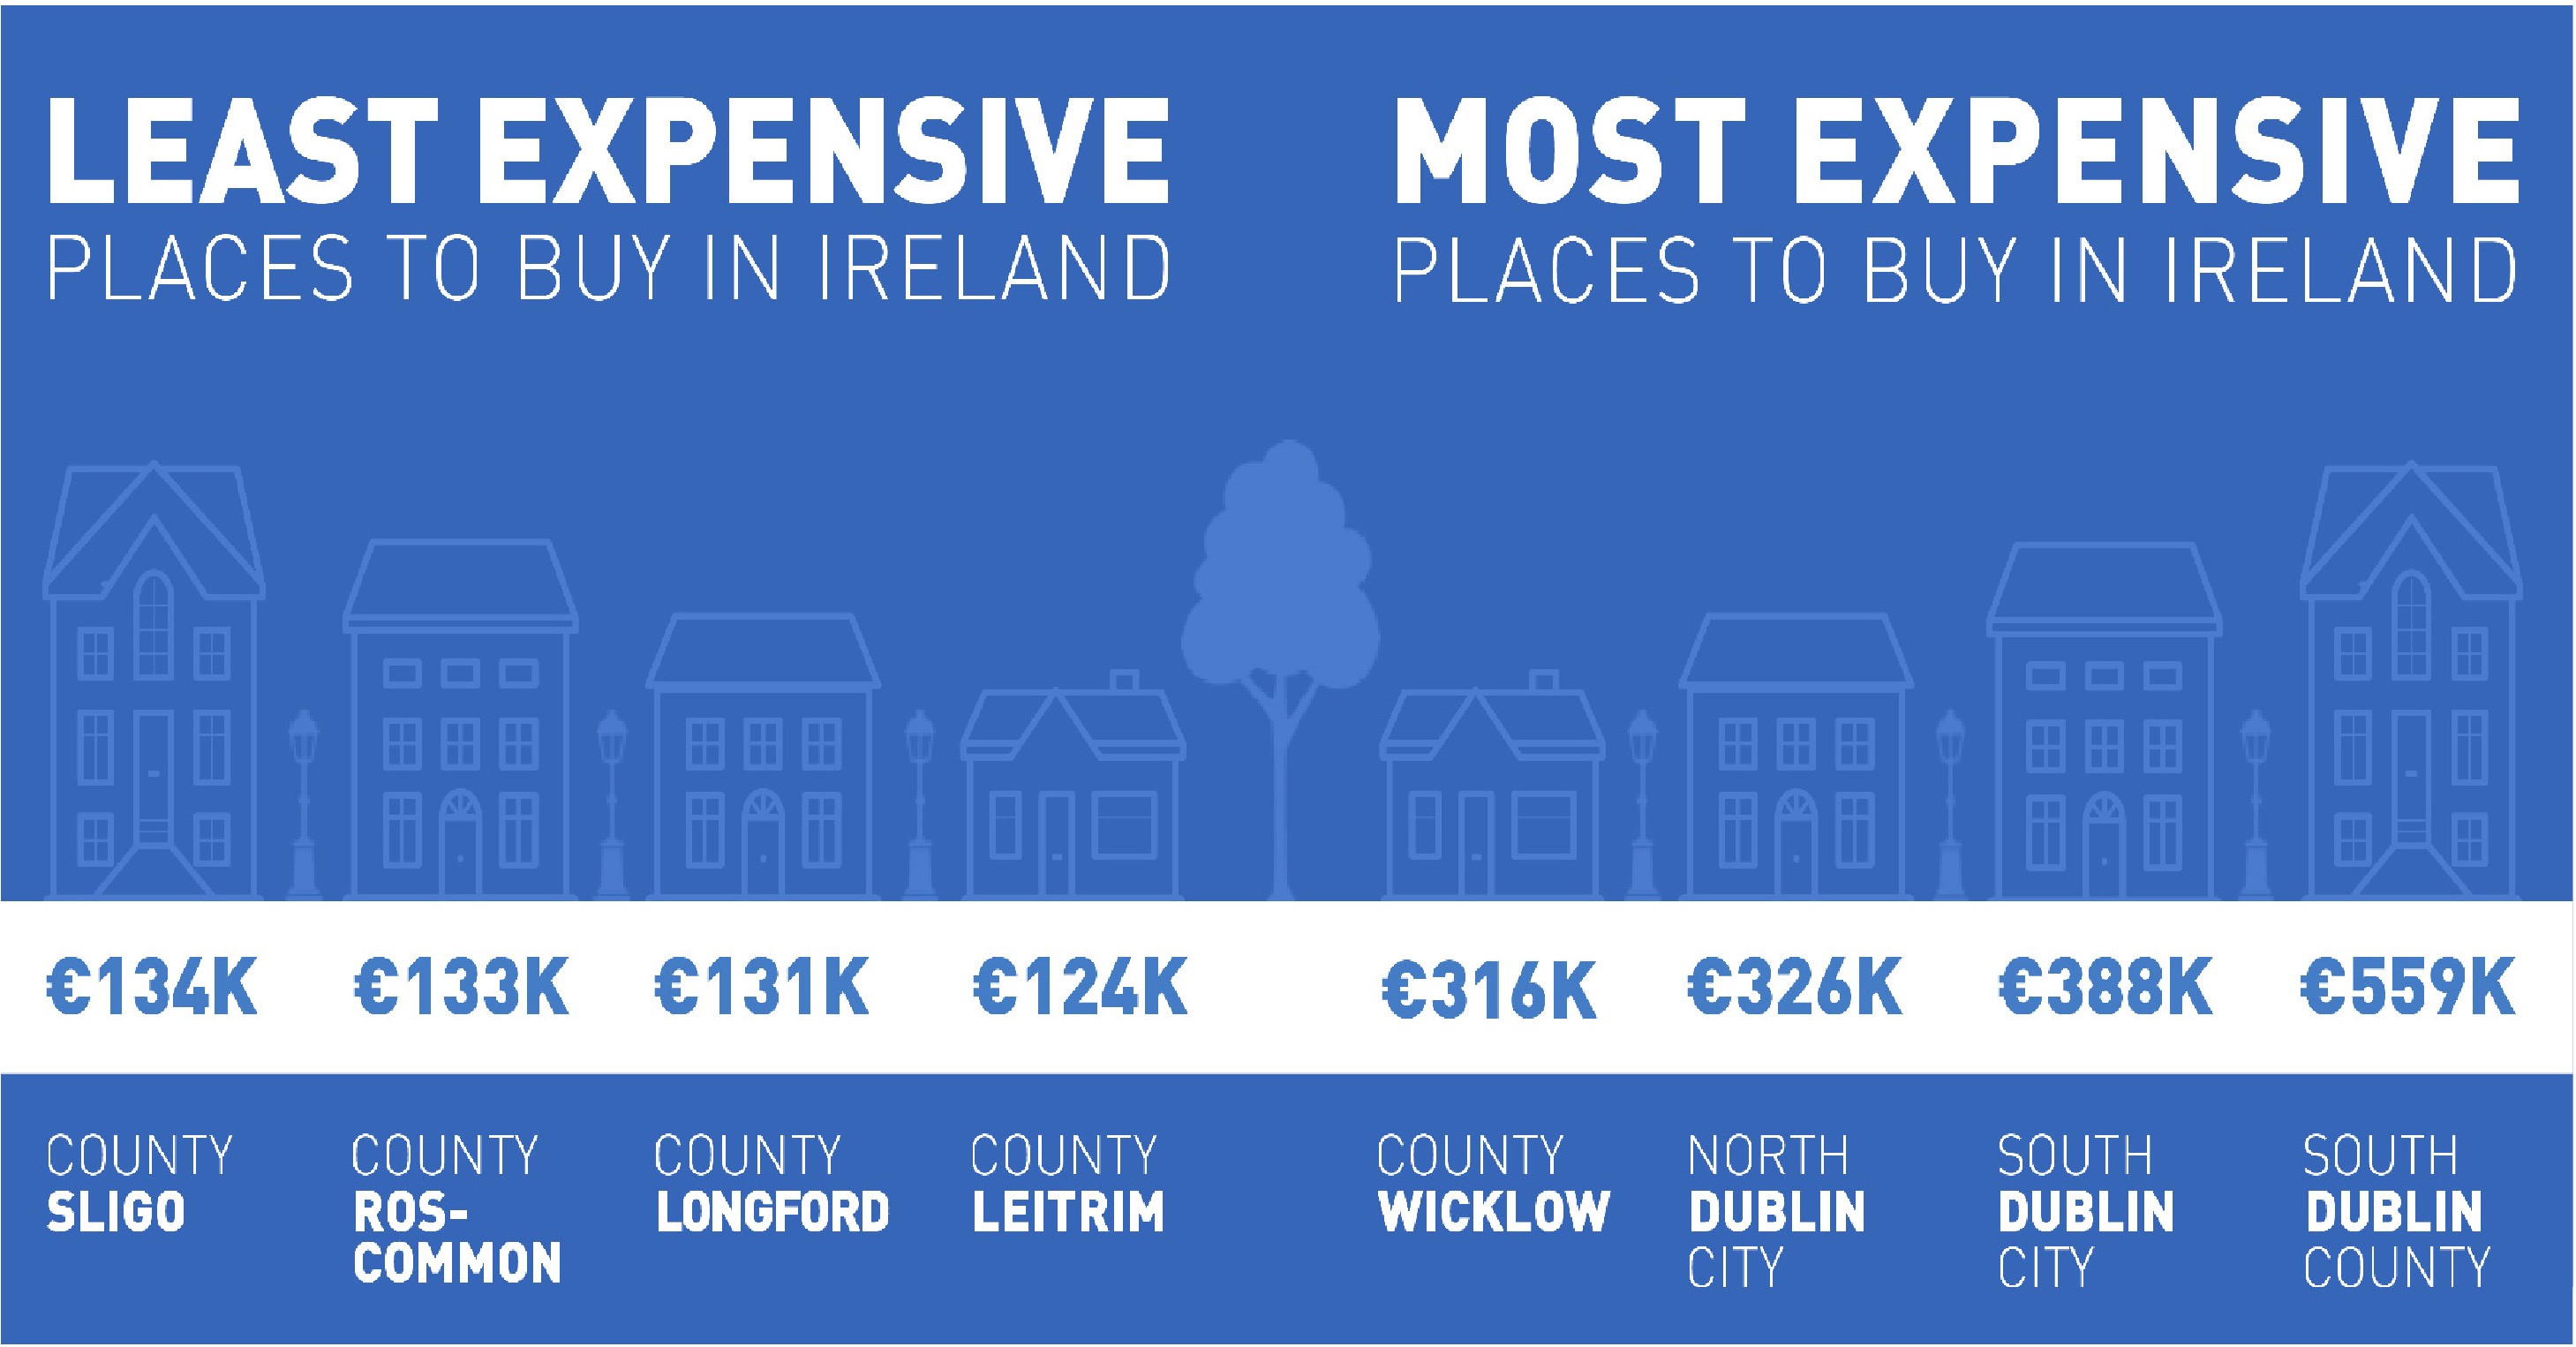 Least and most expensive places to buy in Ireland